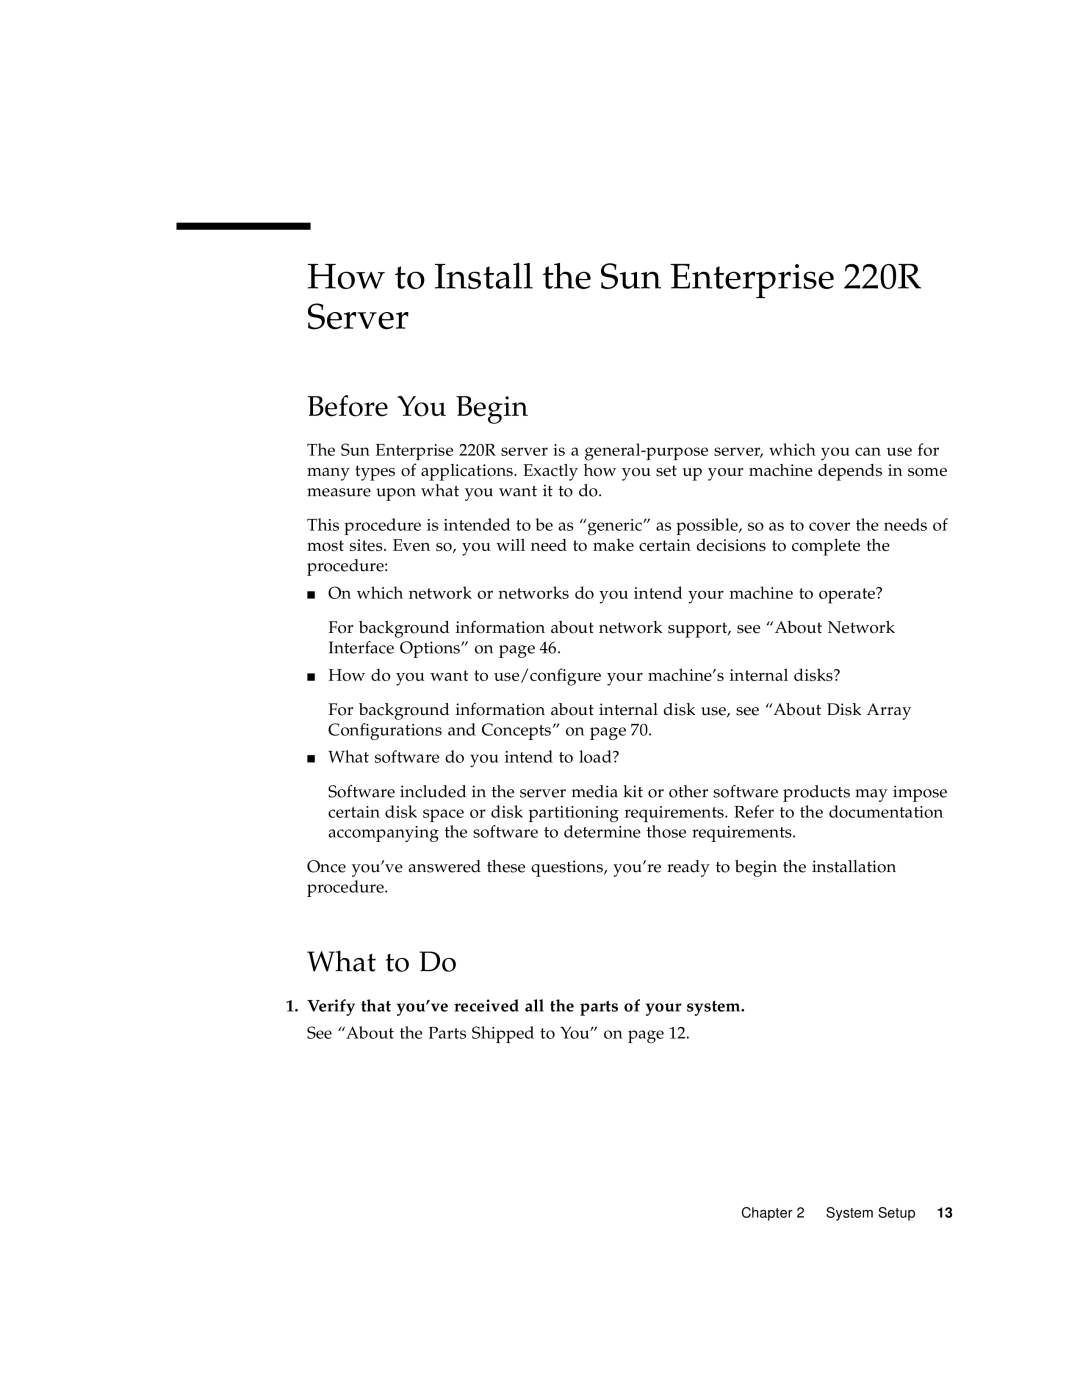 Sun Microsystems manual How to Install the Sun Enterprise 220R Server, Before You Begin, What to Do 